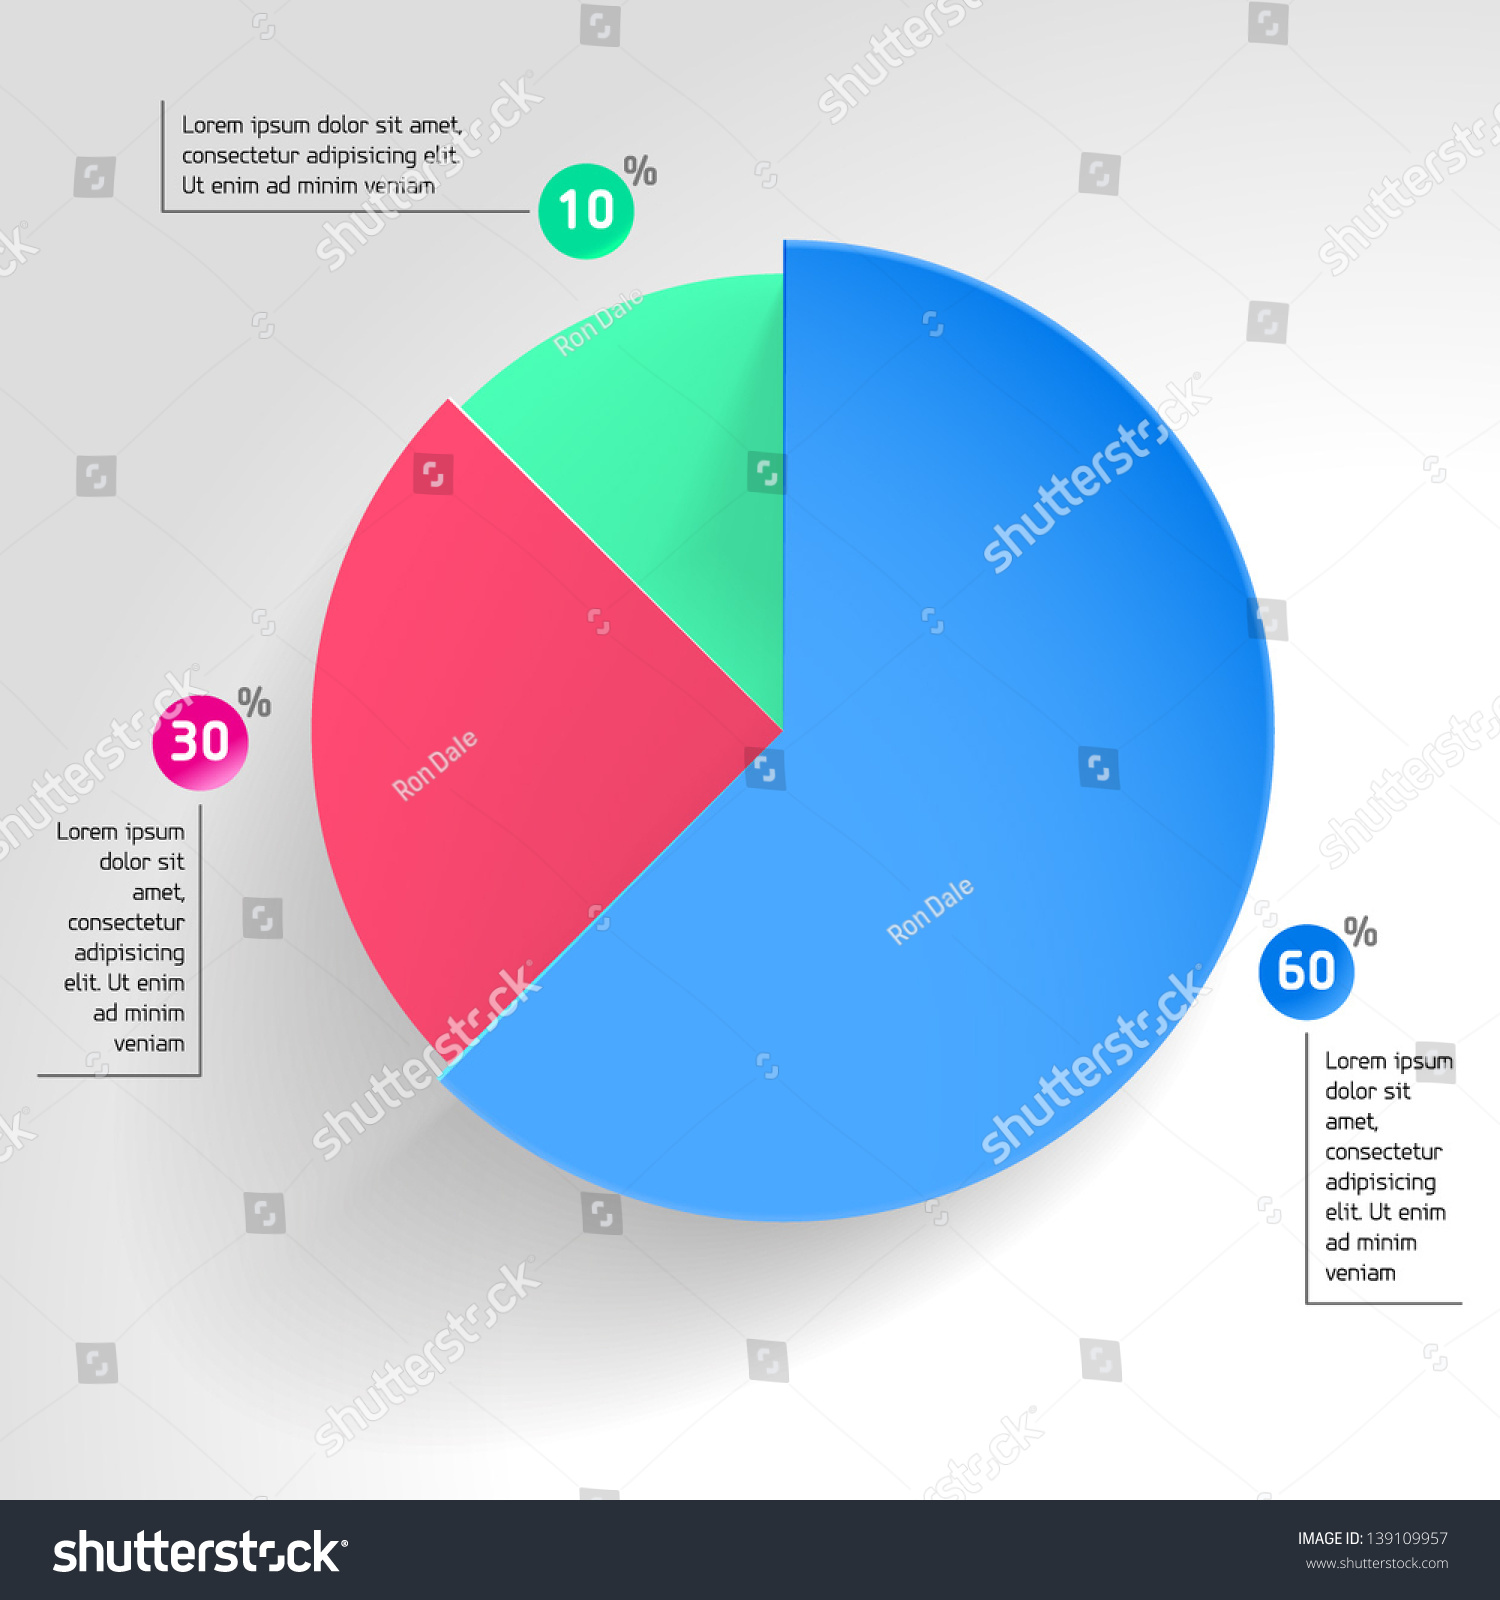 3d Business Pie Chart. Wheel Chart. Multicolored Pie Chart Design With ...